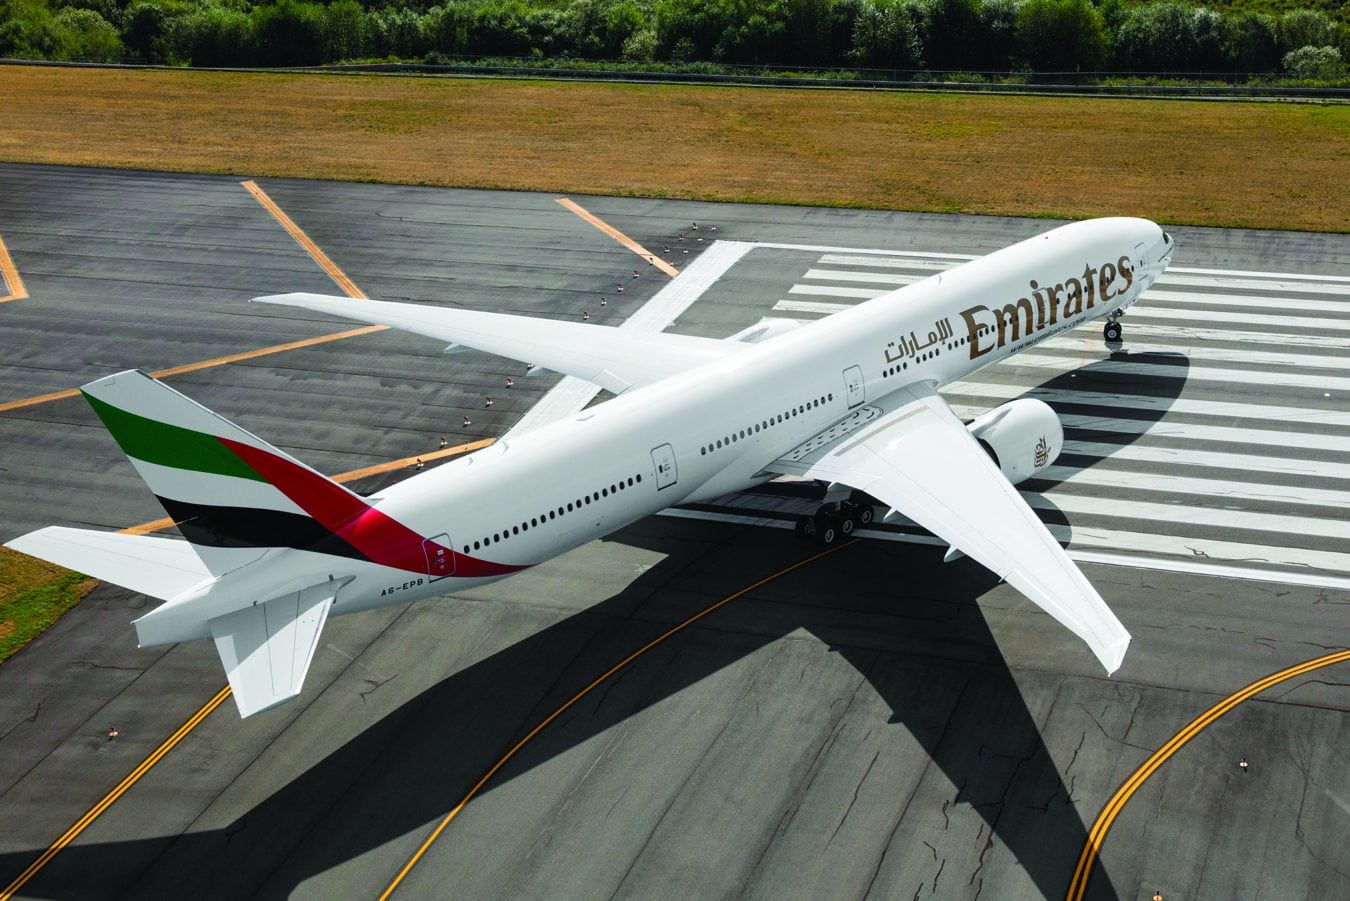 Emirates, Etihad and Qatar may continue adding new U.S. service, much to the chagrin of U.S. carriers United, American, and Delta. 